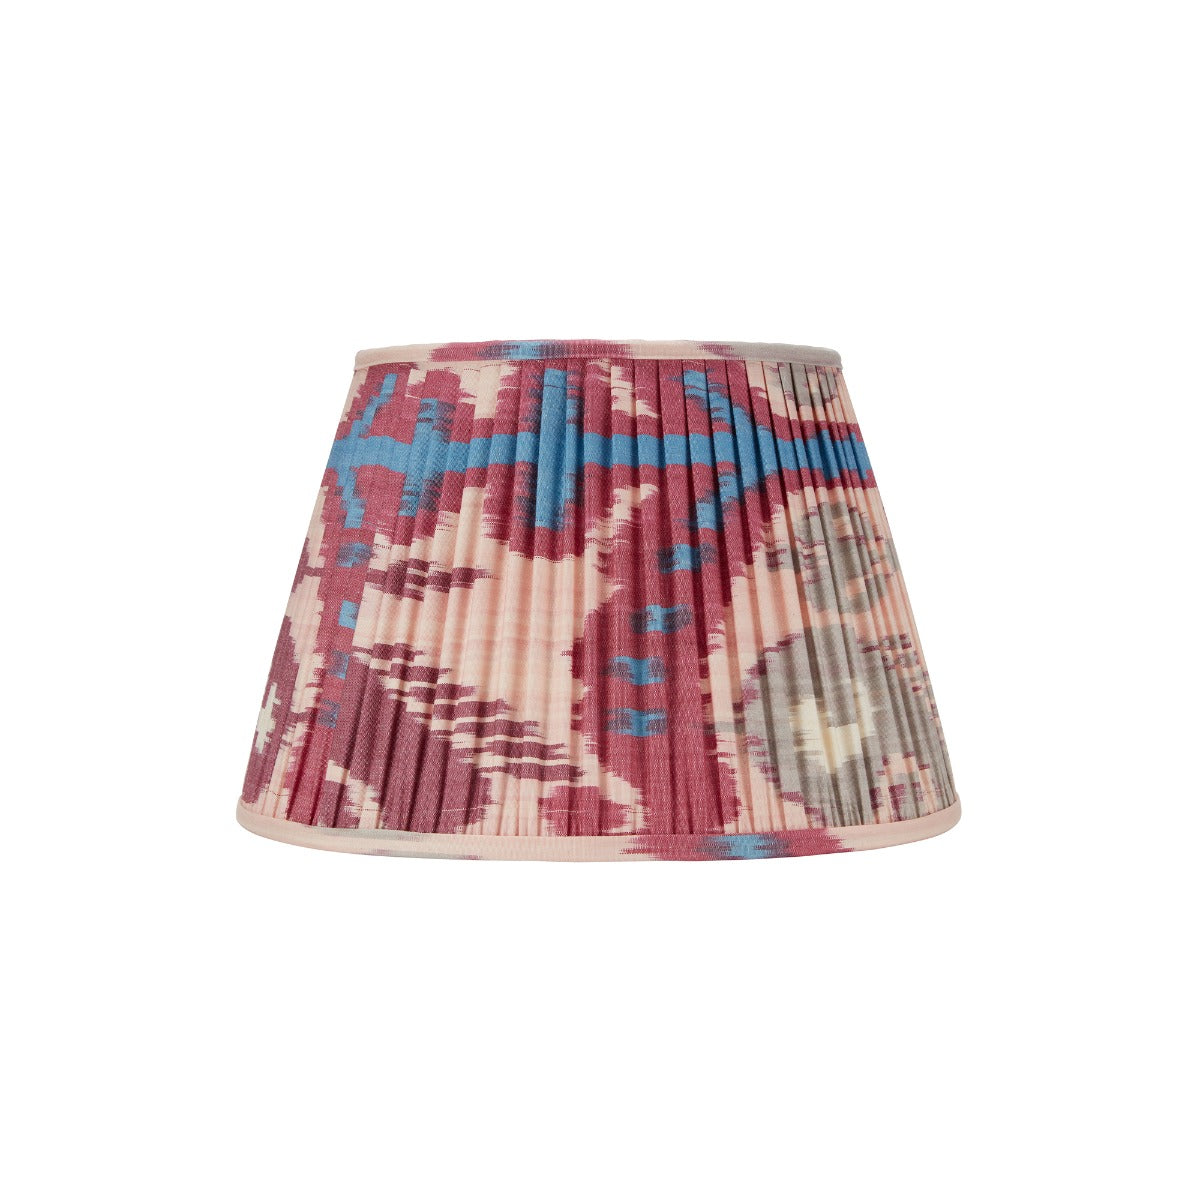 PINK AND FUSCHIA IKAT LAMPSHADE rosanna lonsdale teal lampshade